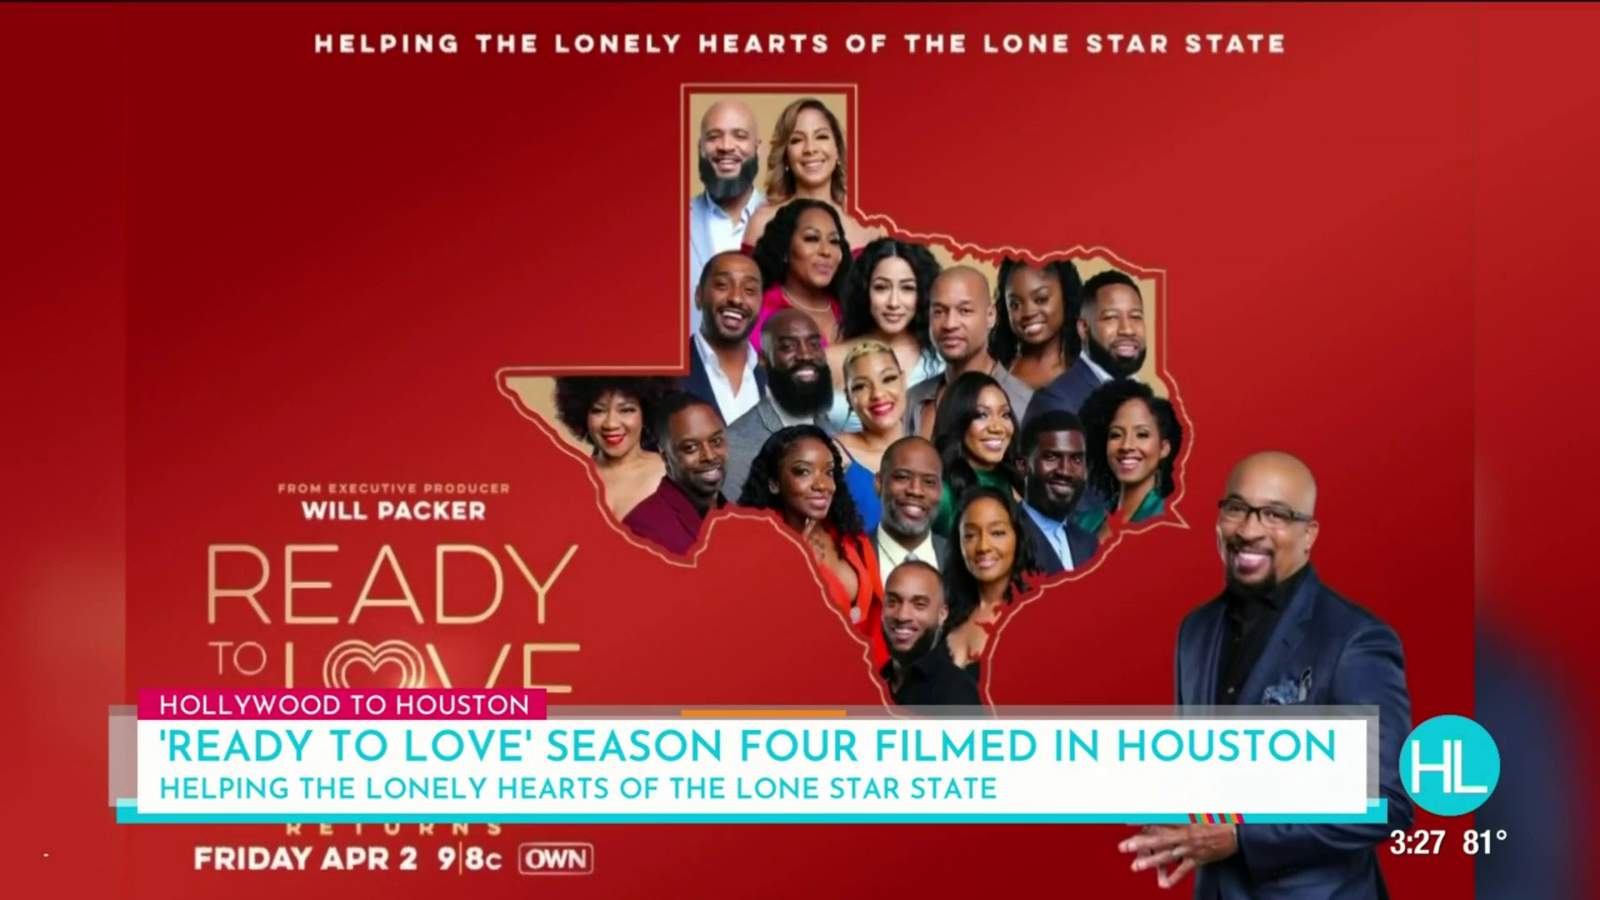 Oprah’s ‘Ready to Love’ returns to Houston for another season